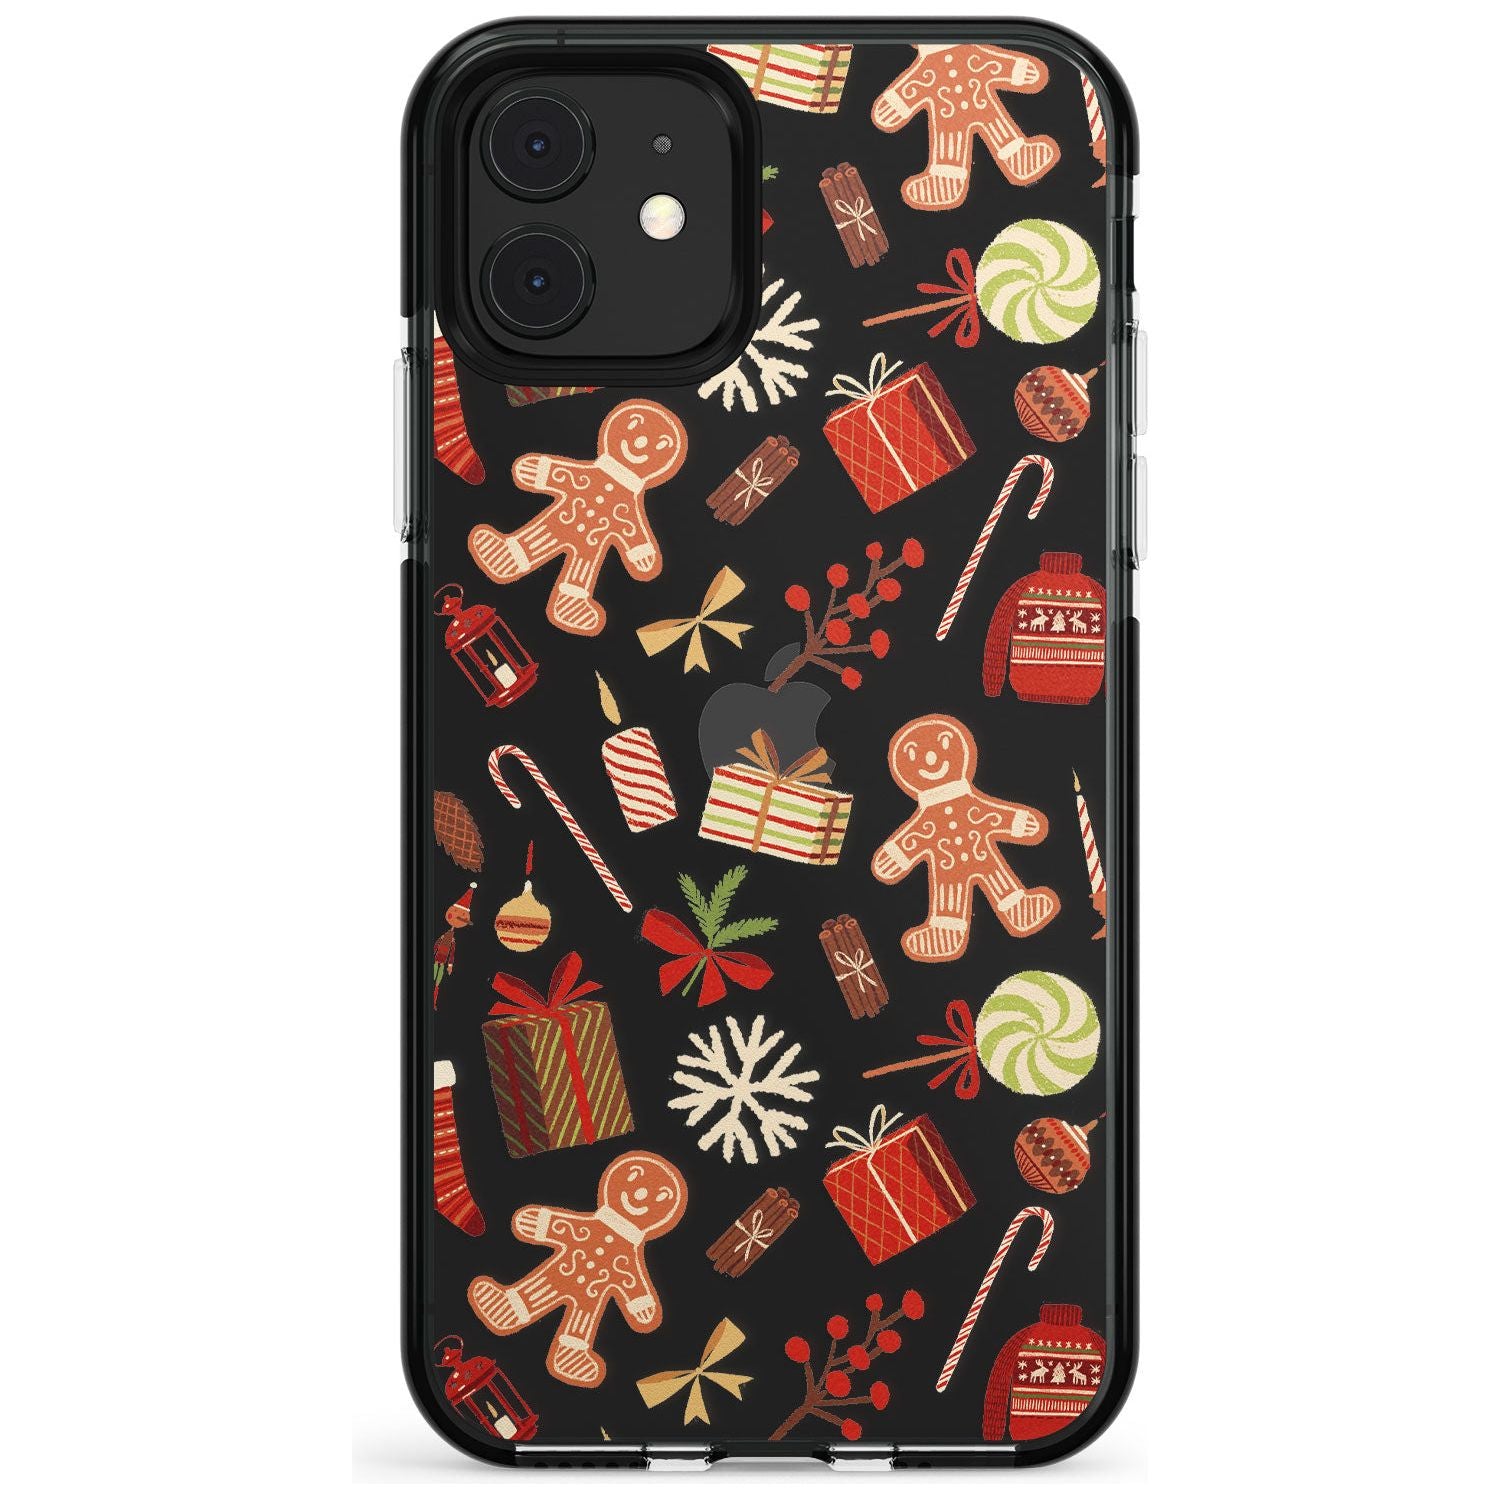 Christmas Assortments Black Impact Phone Case for iPhone 11 Pro Max